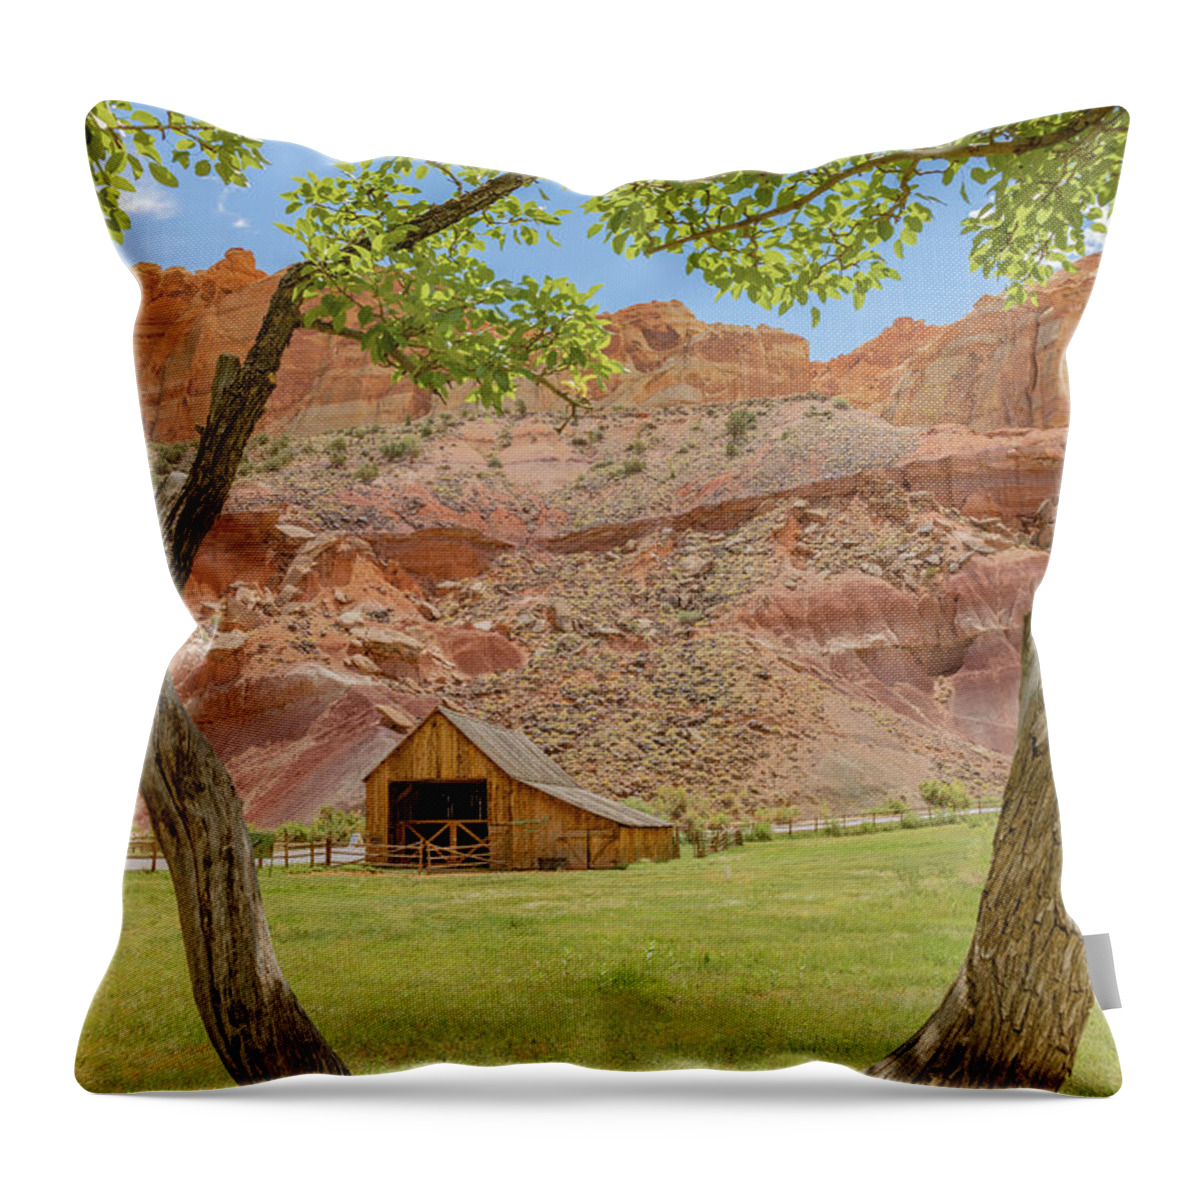 Ige08680 Throw Pillow featuring the photograph Pioneer Barnyard by Gordon Elwell